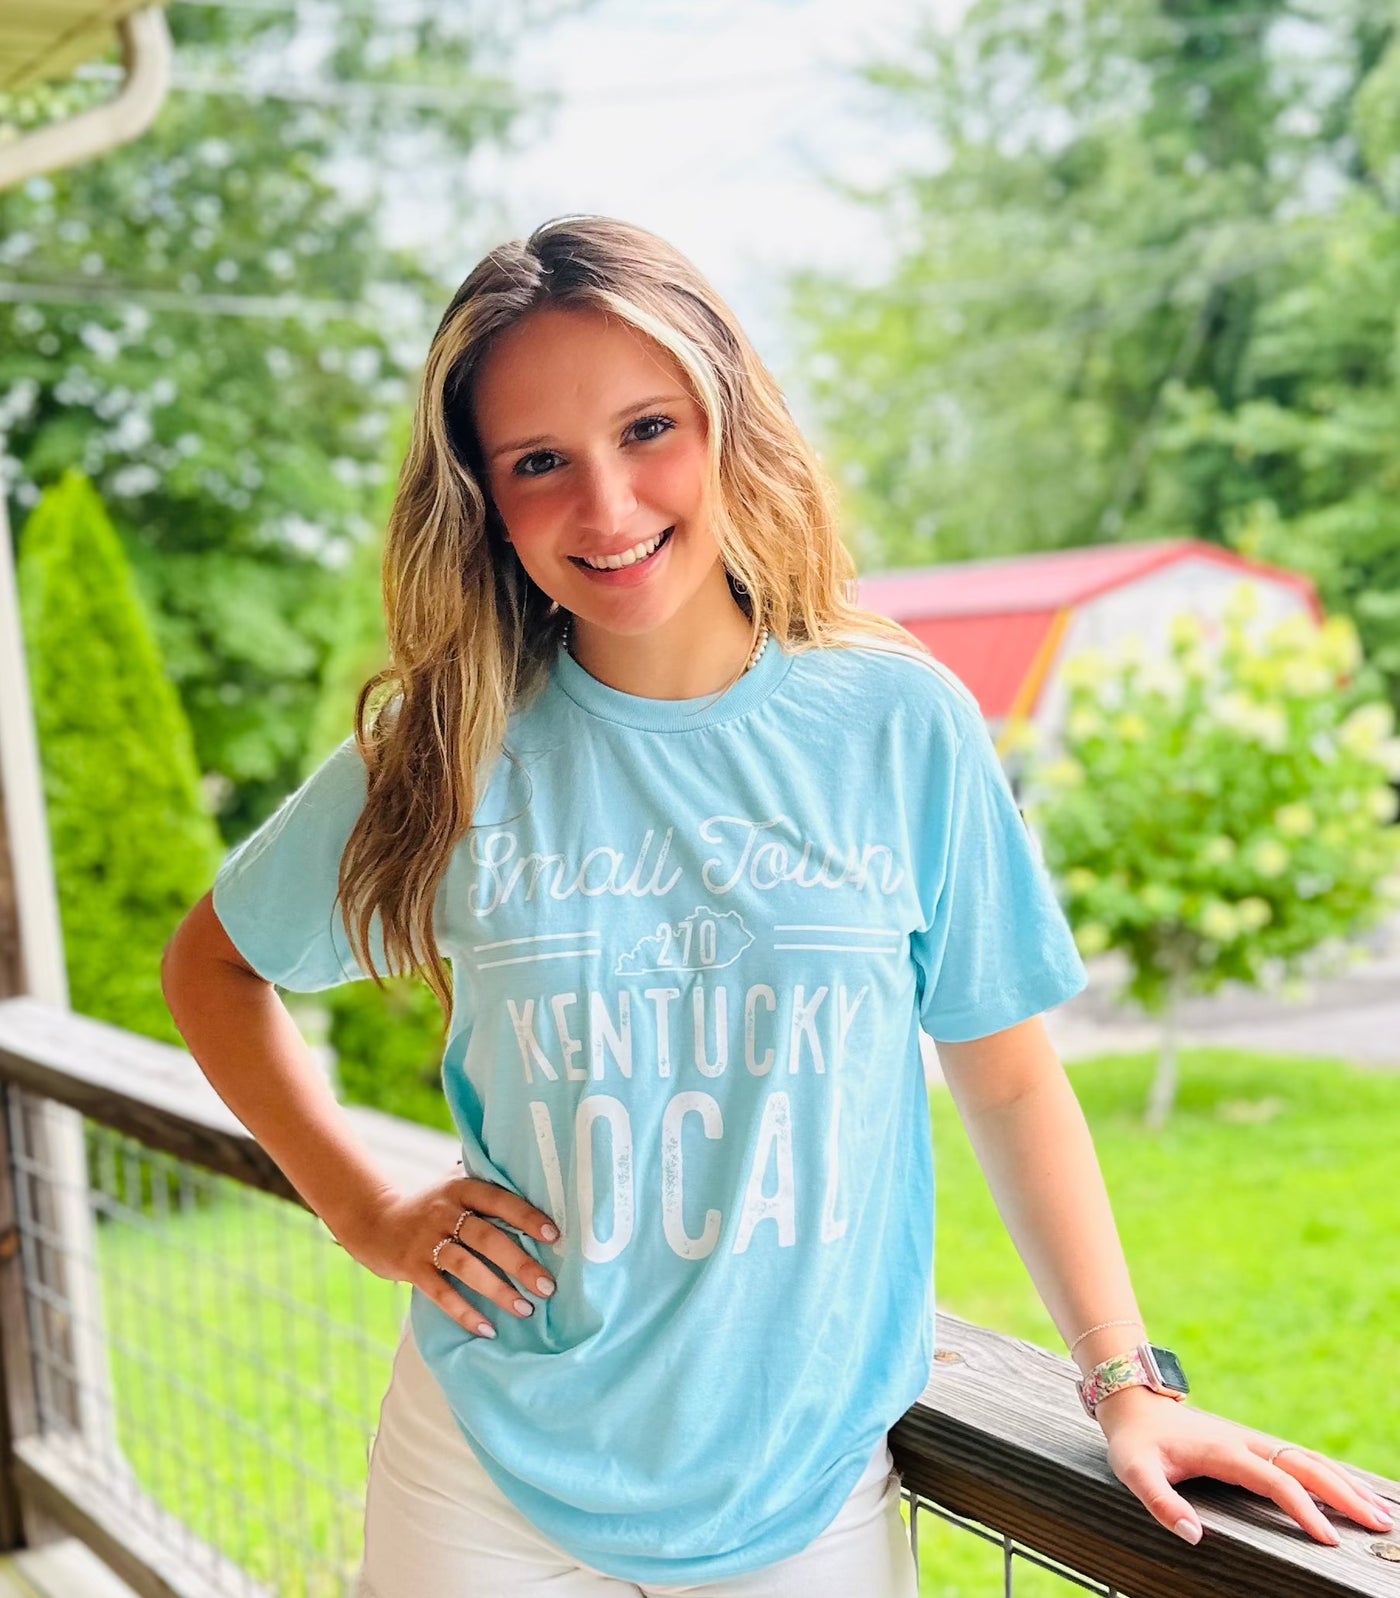 "Small Town 270 KY Local" Tee in Purist Blue